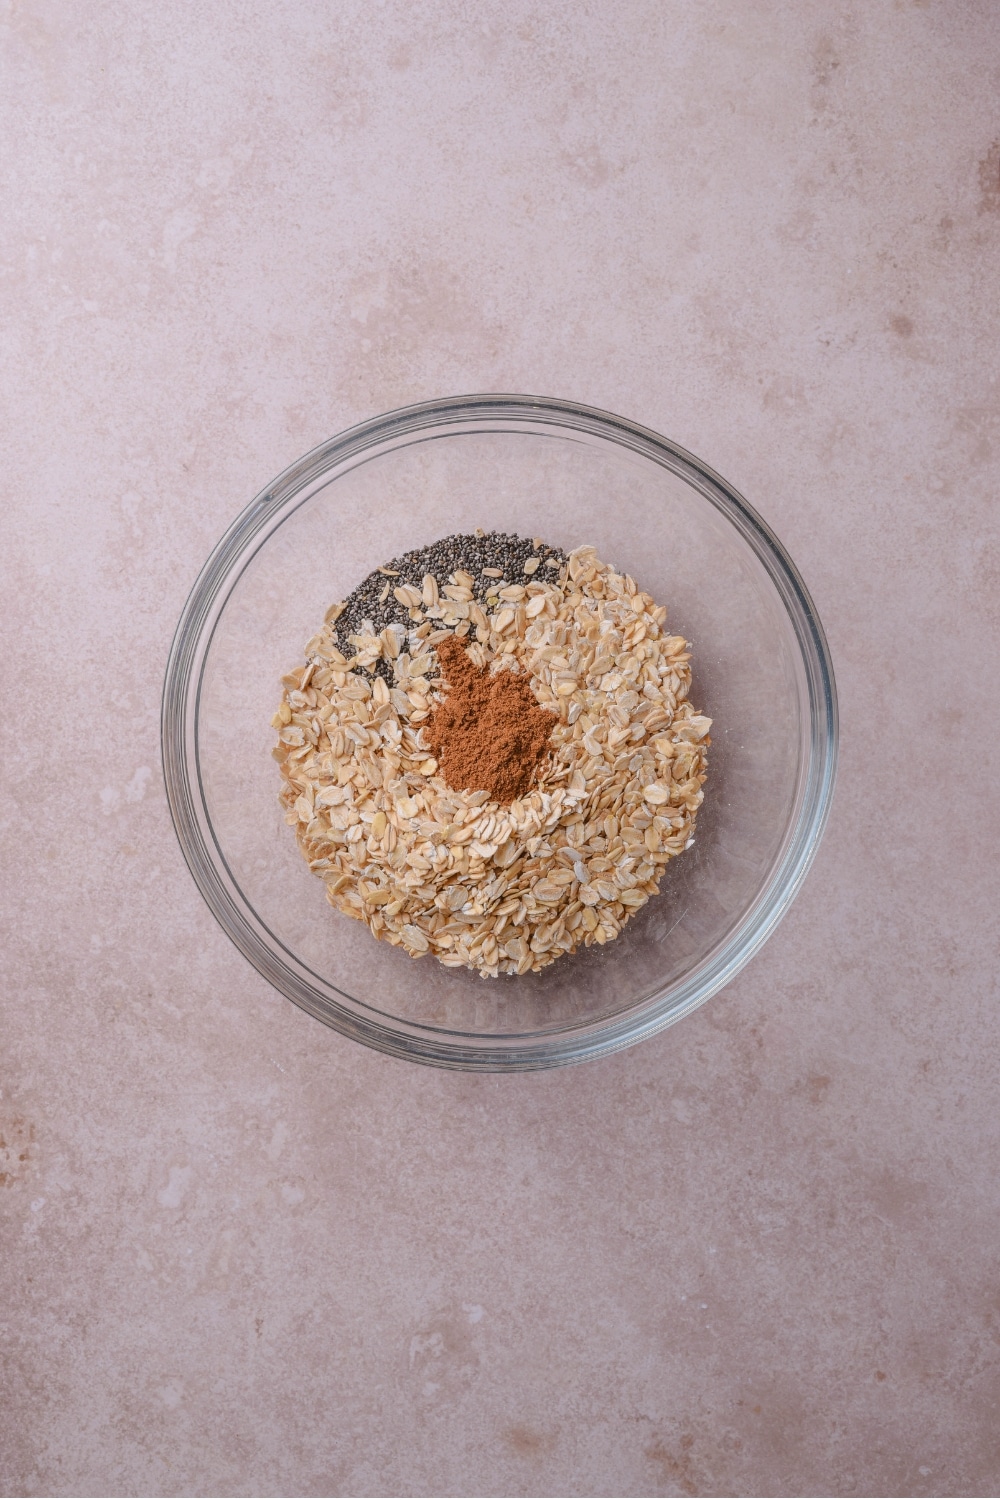 A glass bowl filled with oats, chia seeds, and pumpkin pie spice on top.